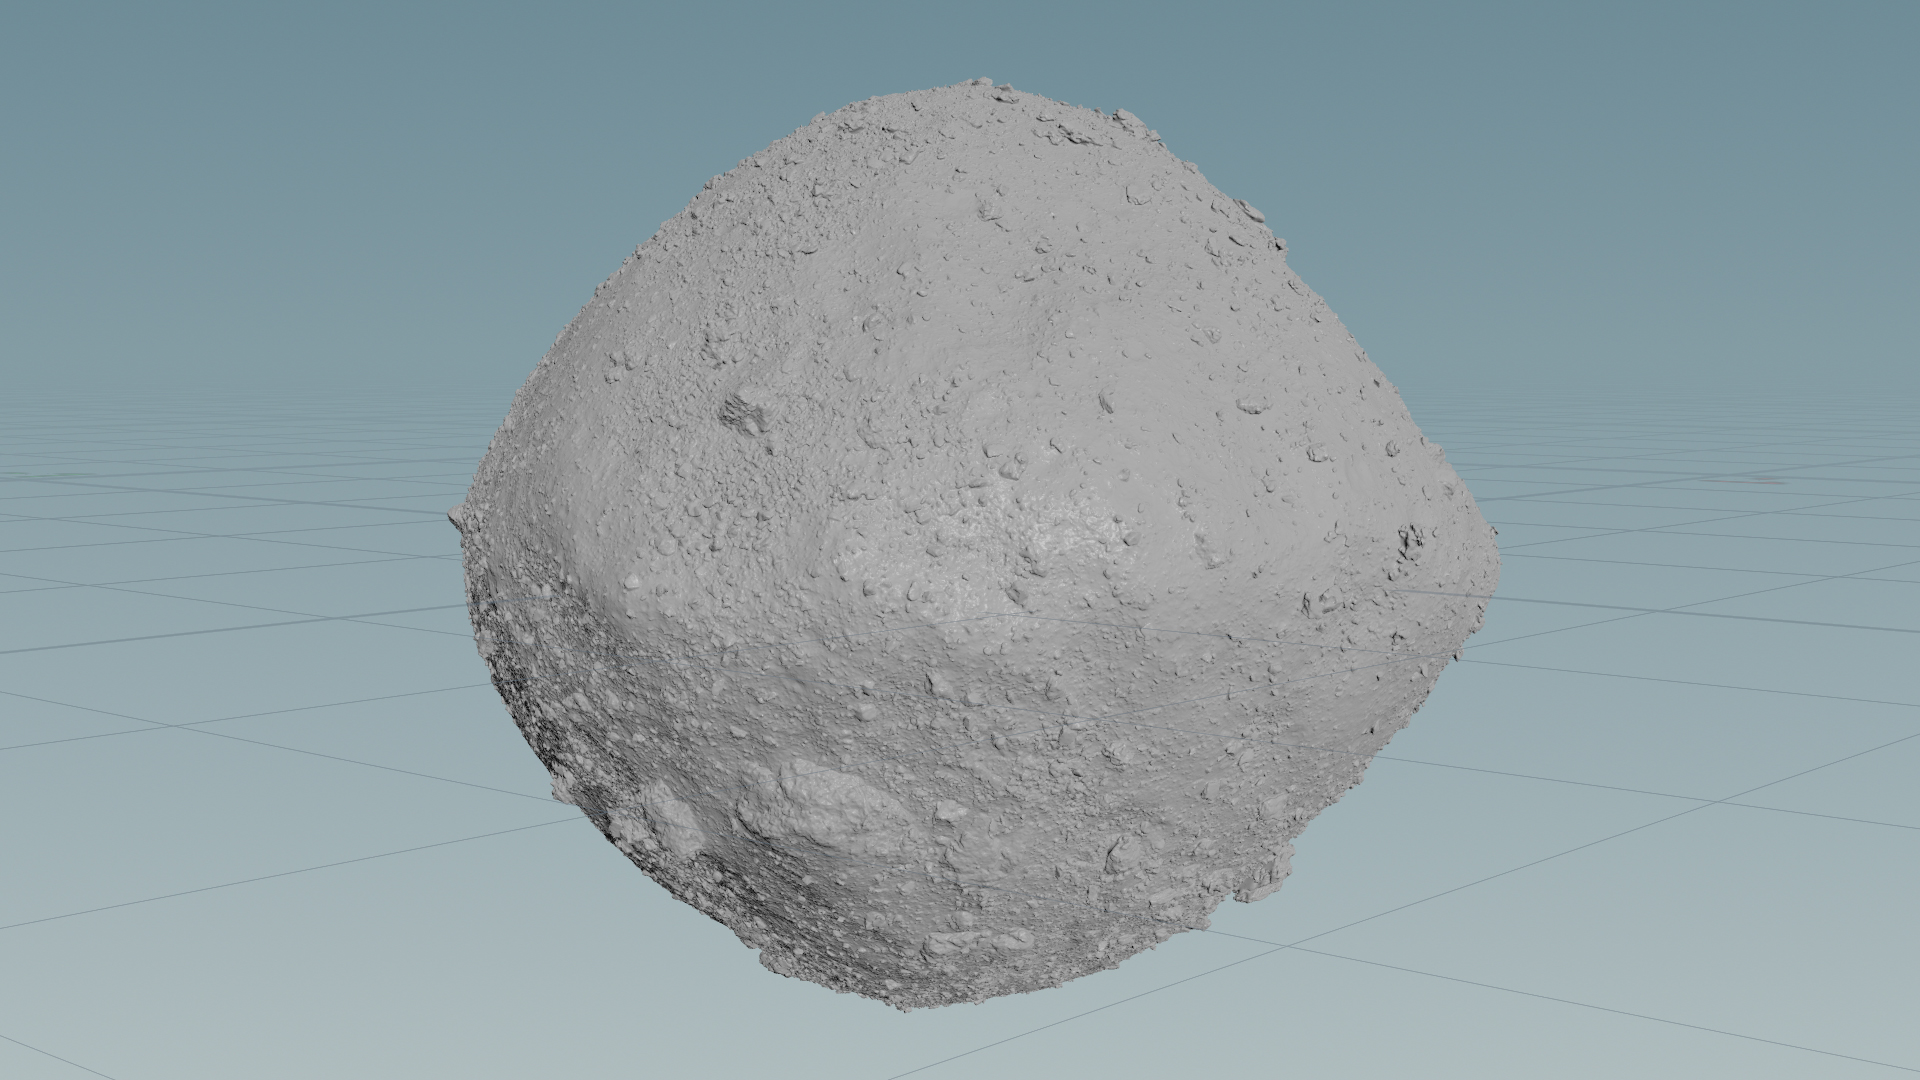 Global Bennu 3D model - OLA v21 PTM - 17.9M polygonsThis model was used in and described by Seabrook et al. (2022). This model used a Poisson reconstruction method (Kazhdan et al., 2020), a technique that better captures the undersides and complex geometries of boulders on Bennu.This model is available in OBJ and glTF (glb) formats.  Right click the desired format link below and select “Save Link As…” to download the model. OBJ (815.9 MB)GLB (321.6 MB)